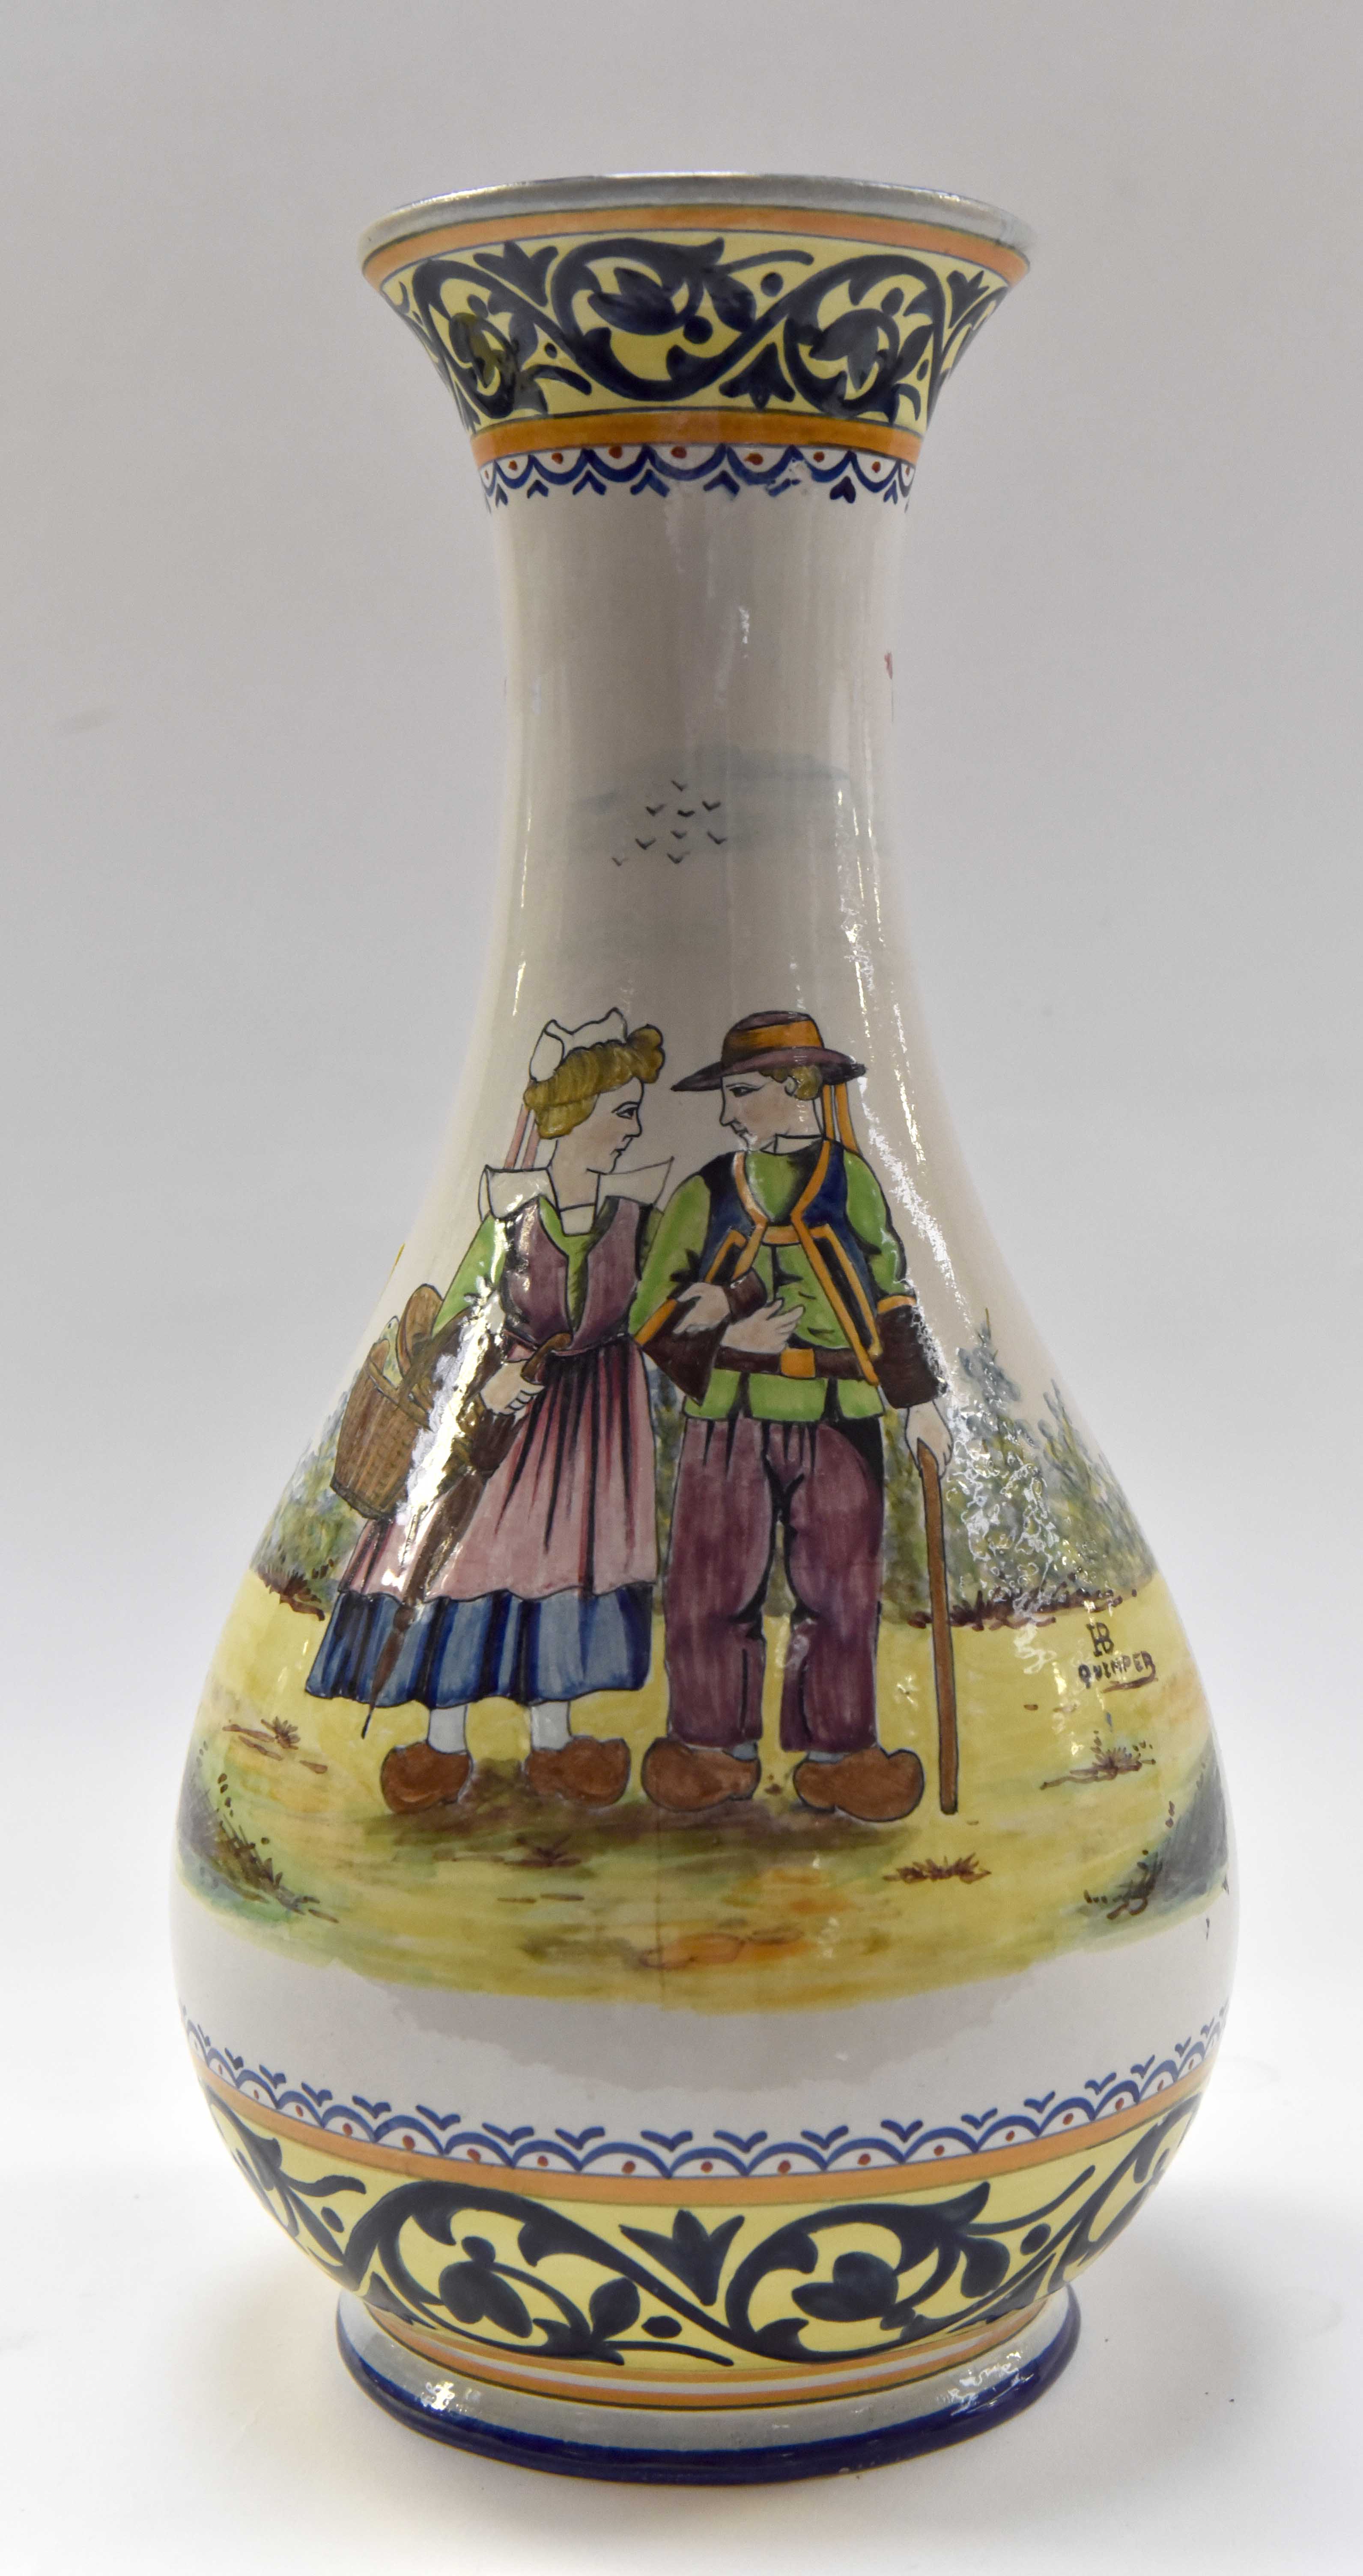 A 1930s H.B.Quimper vase, Decorated by D.R. influenced by Paul Fouillen.